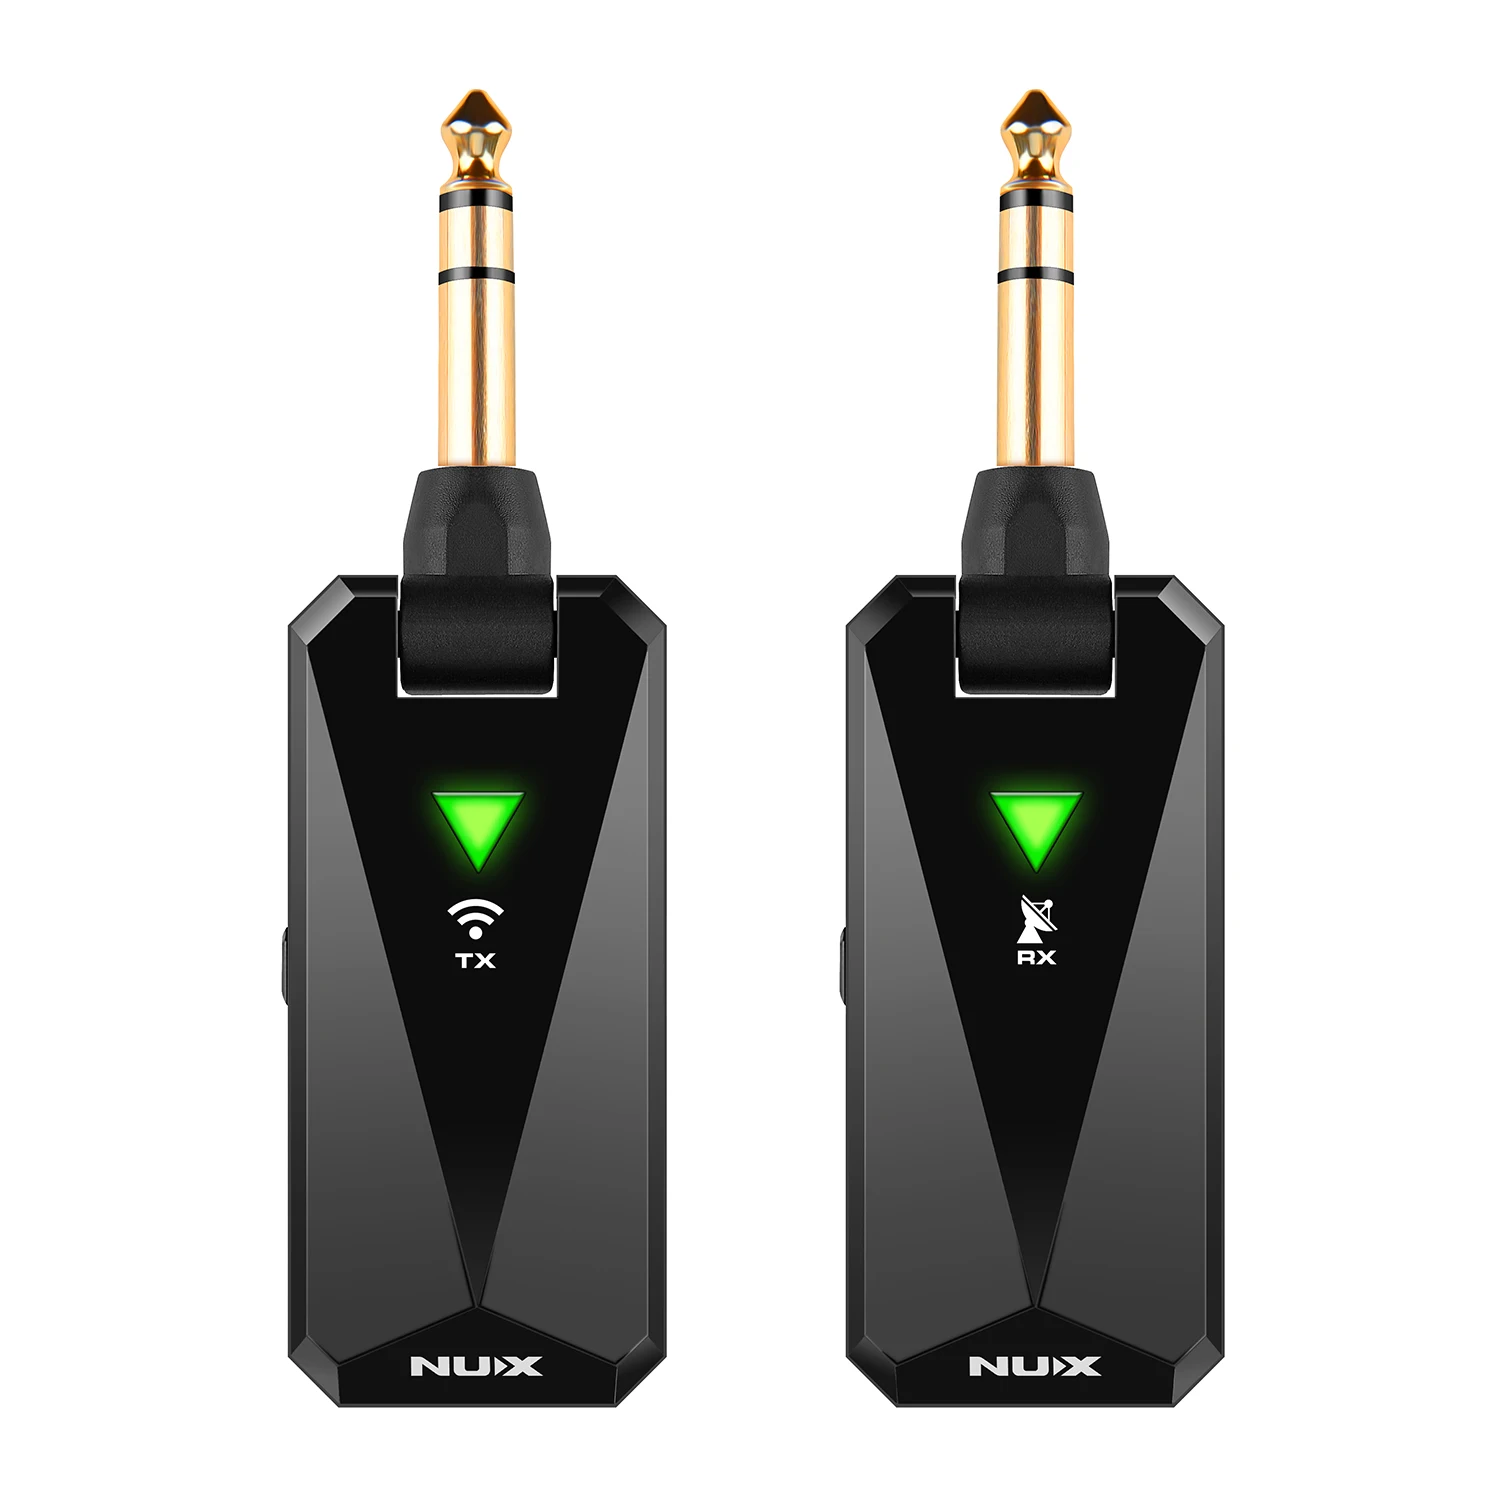 

NUX B-5RC 2.4G Guitar Wireless System Transmitter & Receiver 15M Transmission Distance Built-in Rechargeable Lithium Battery